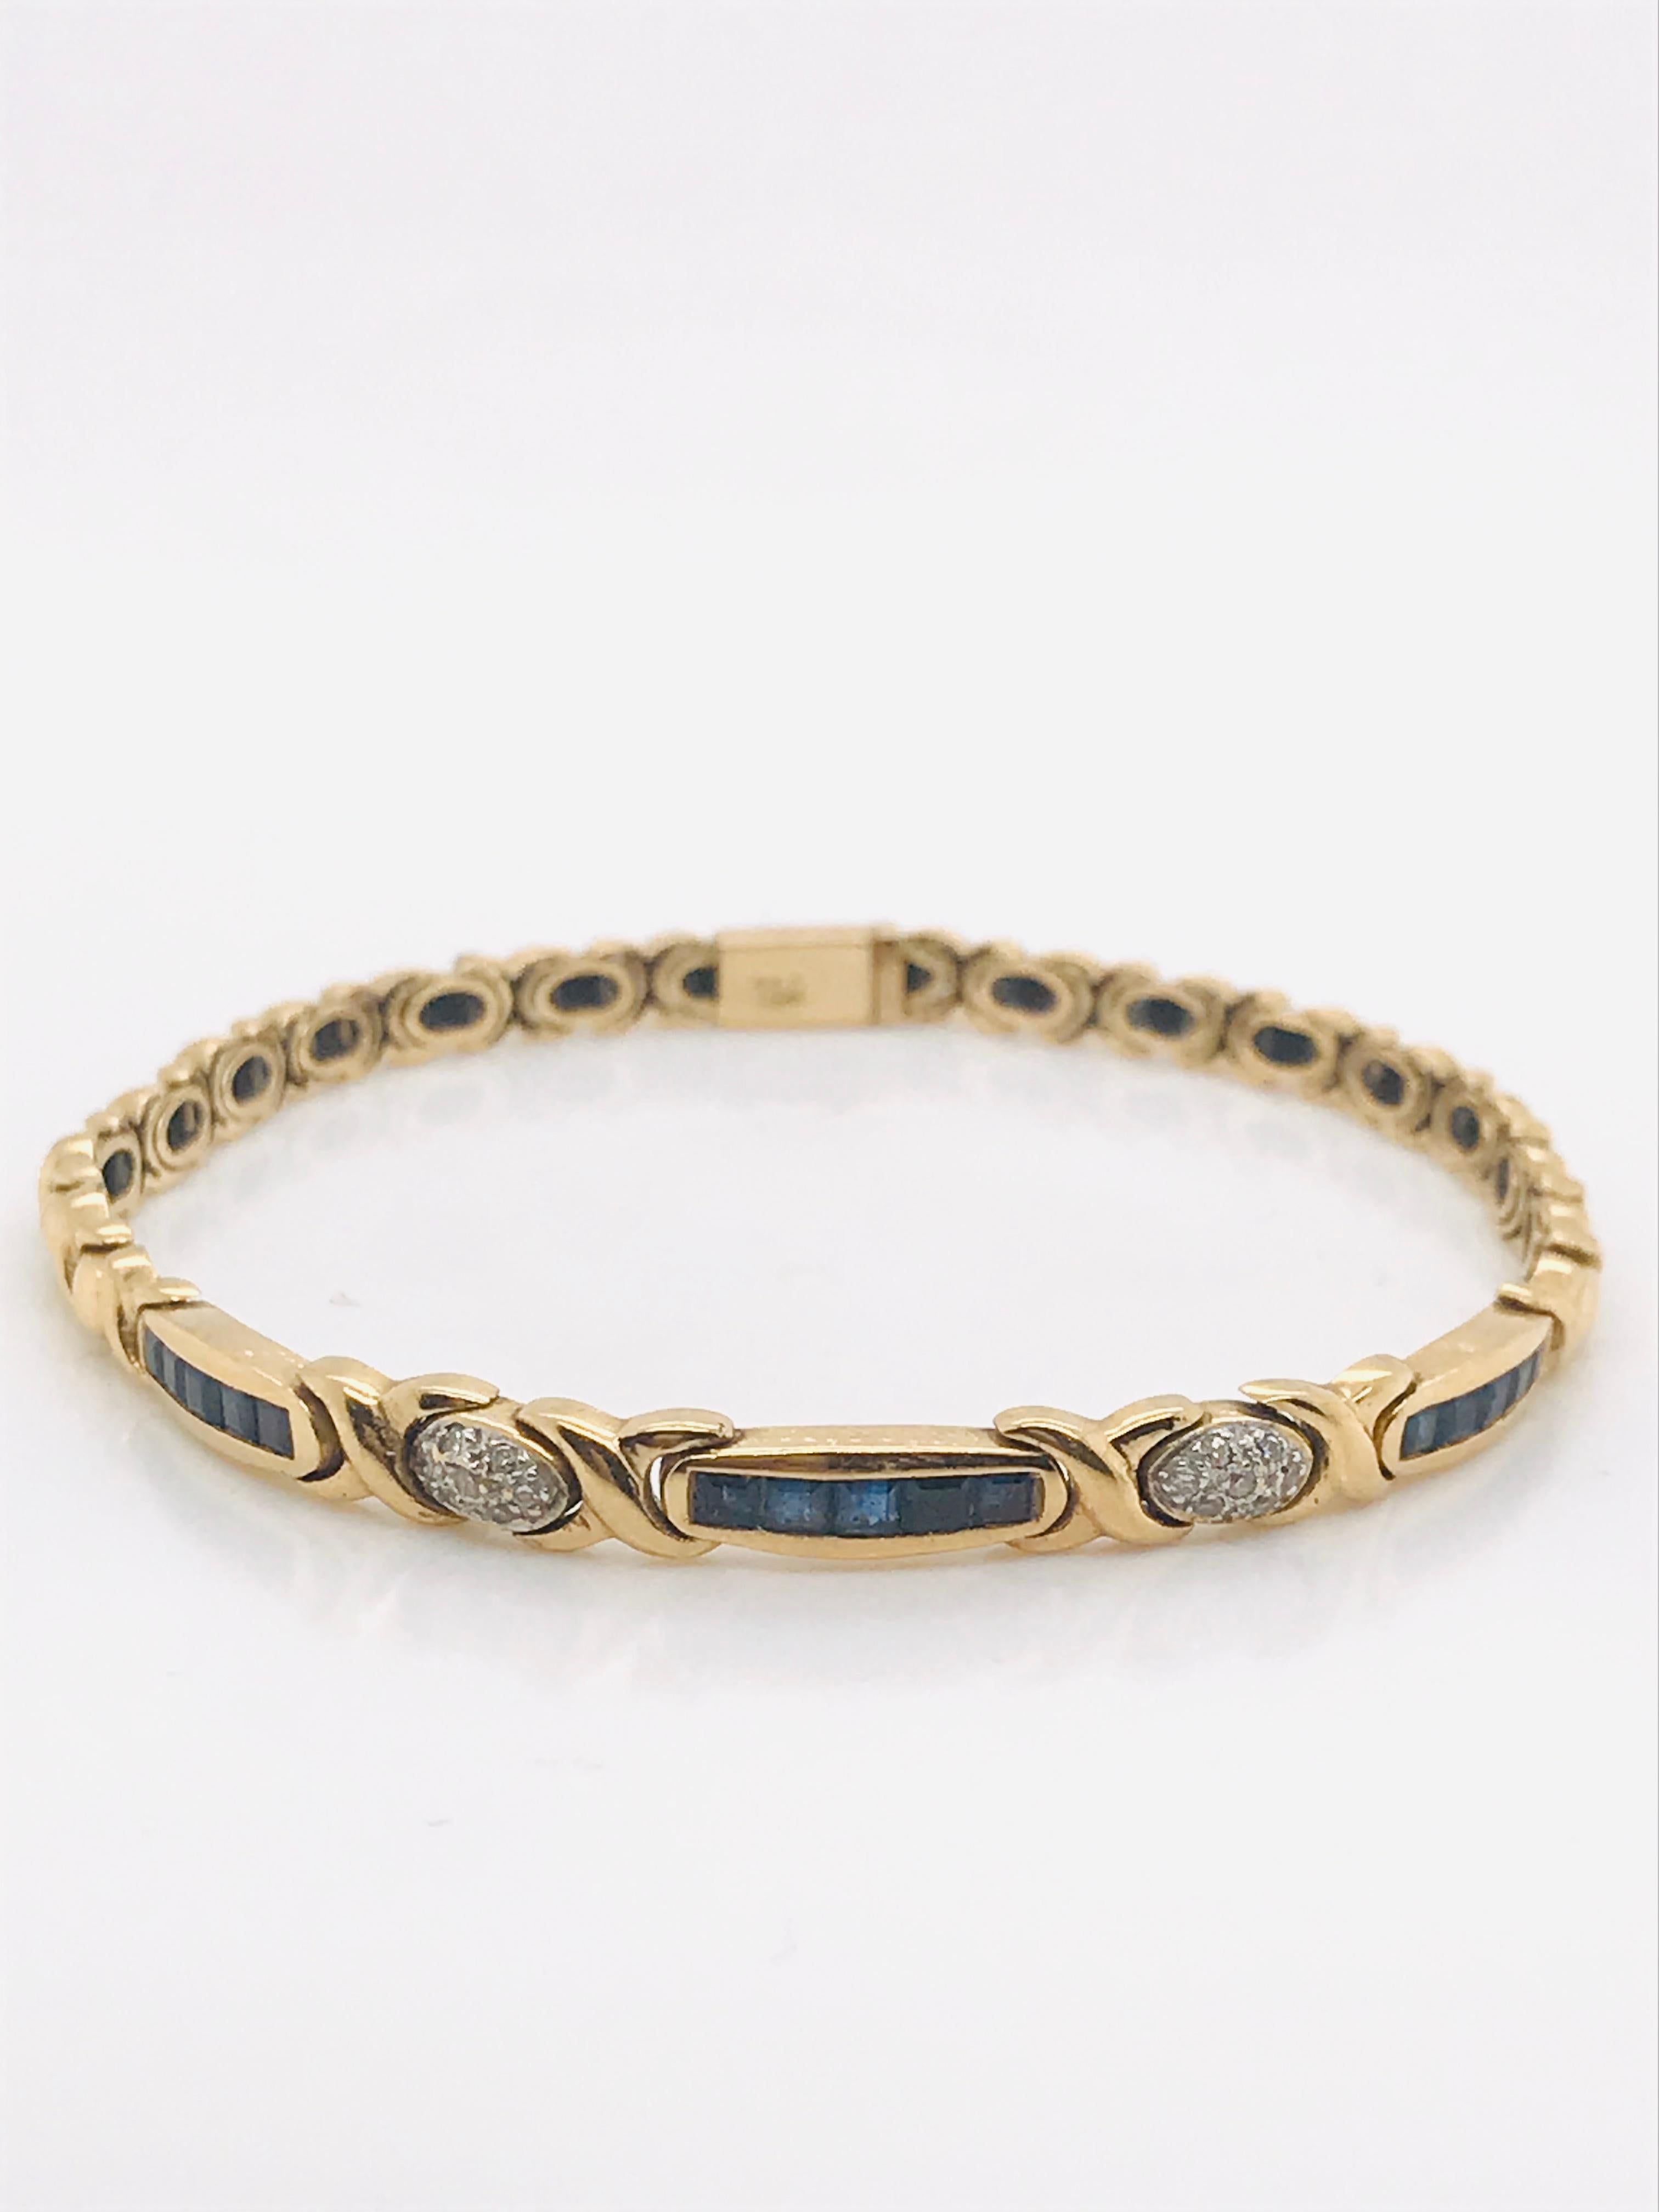 Women's Yellow Gold 18 Carat Bracelet with Sapphires and Diamonds